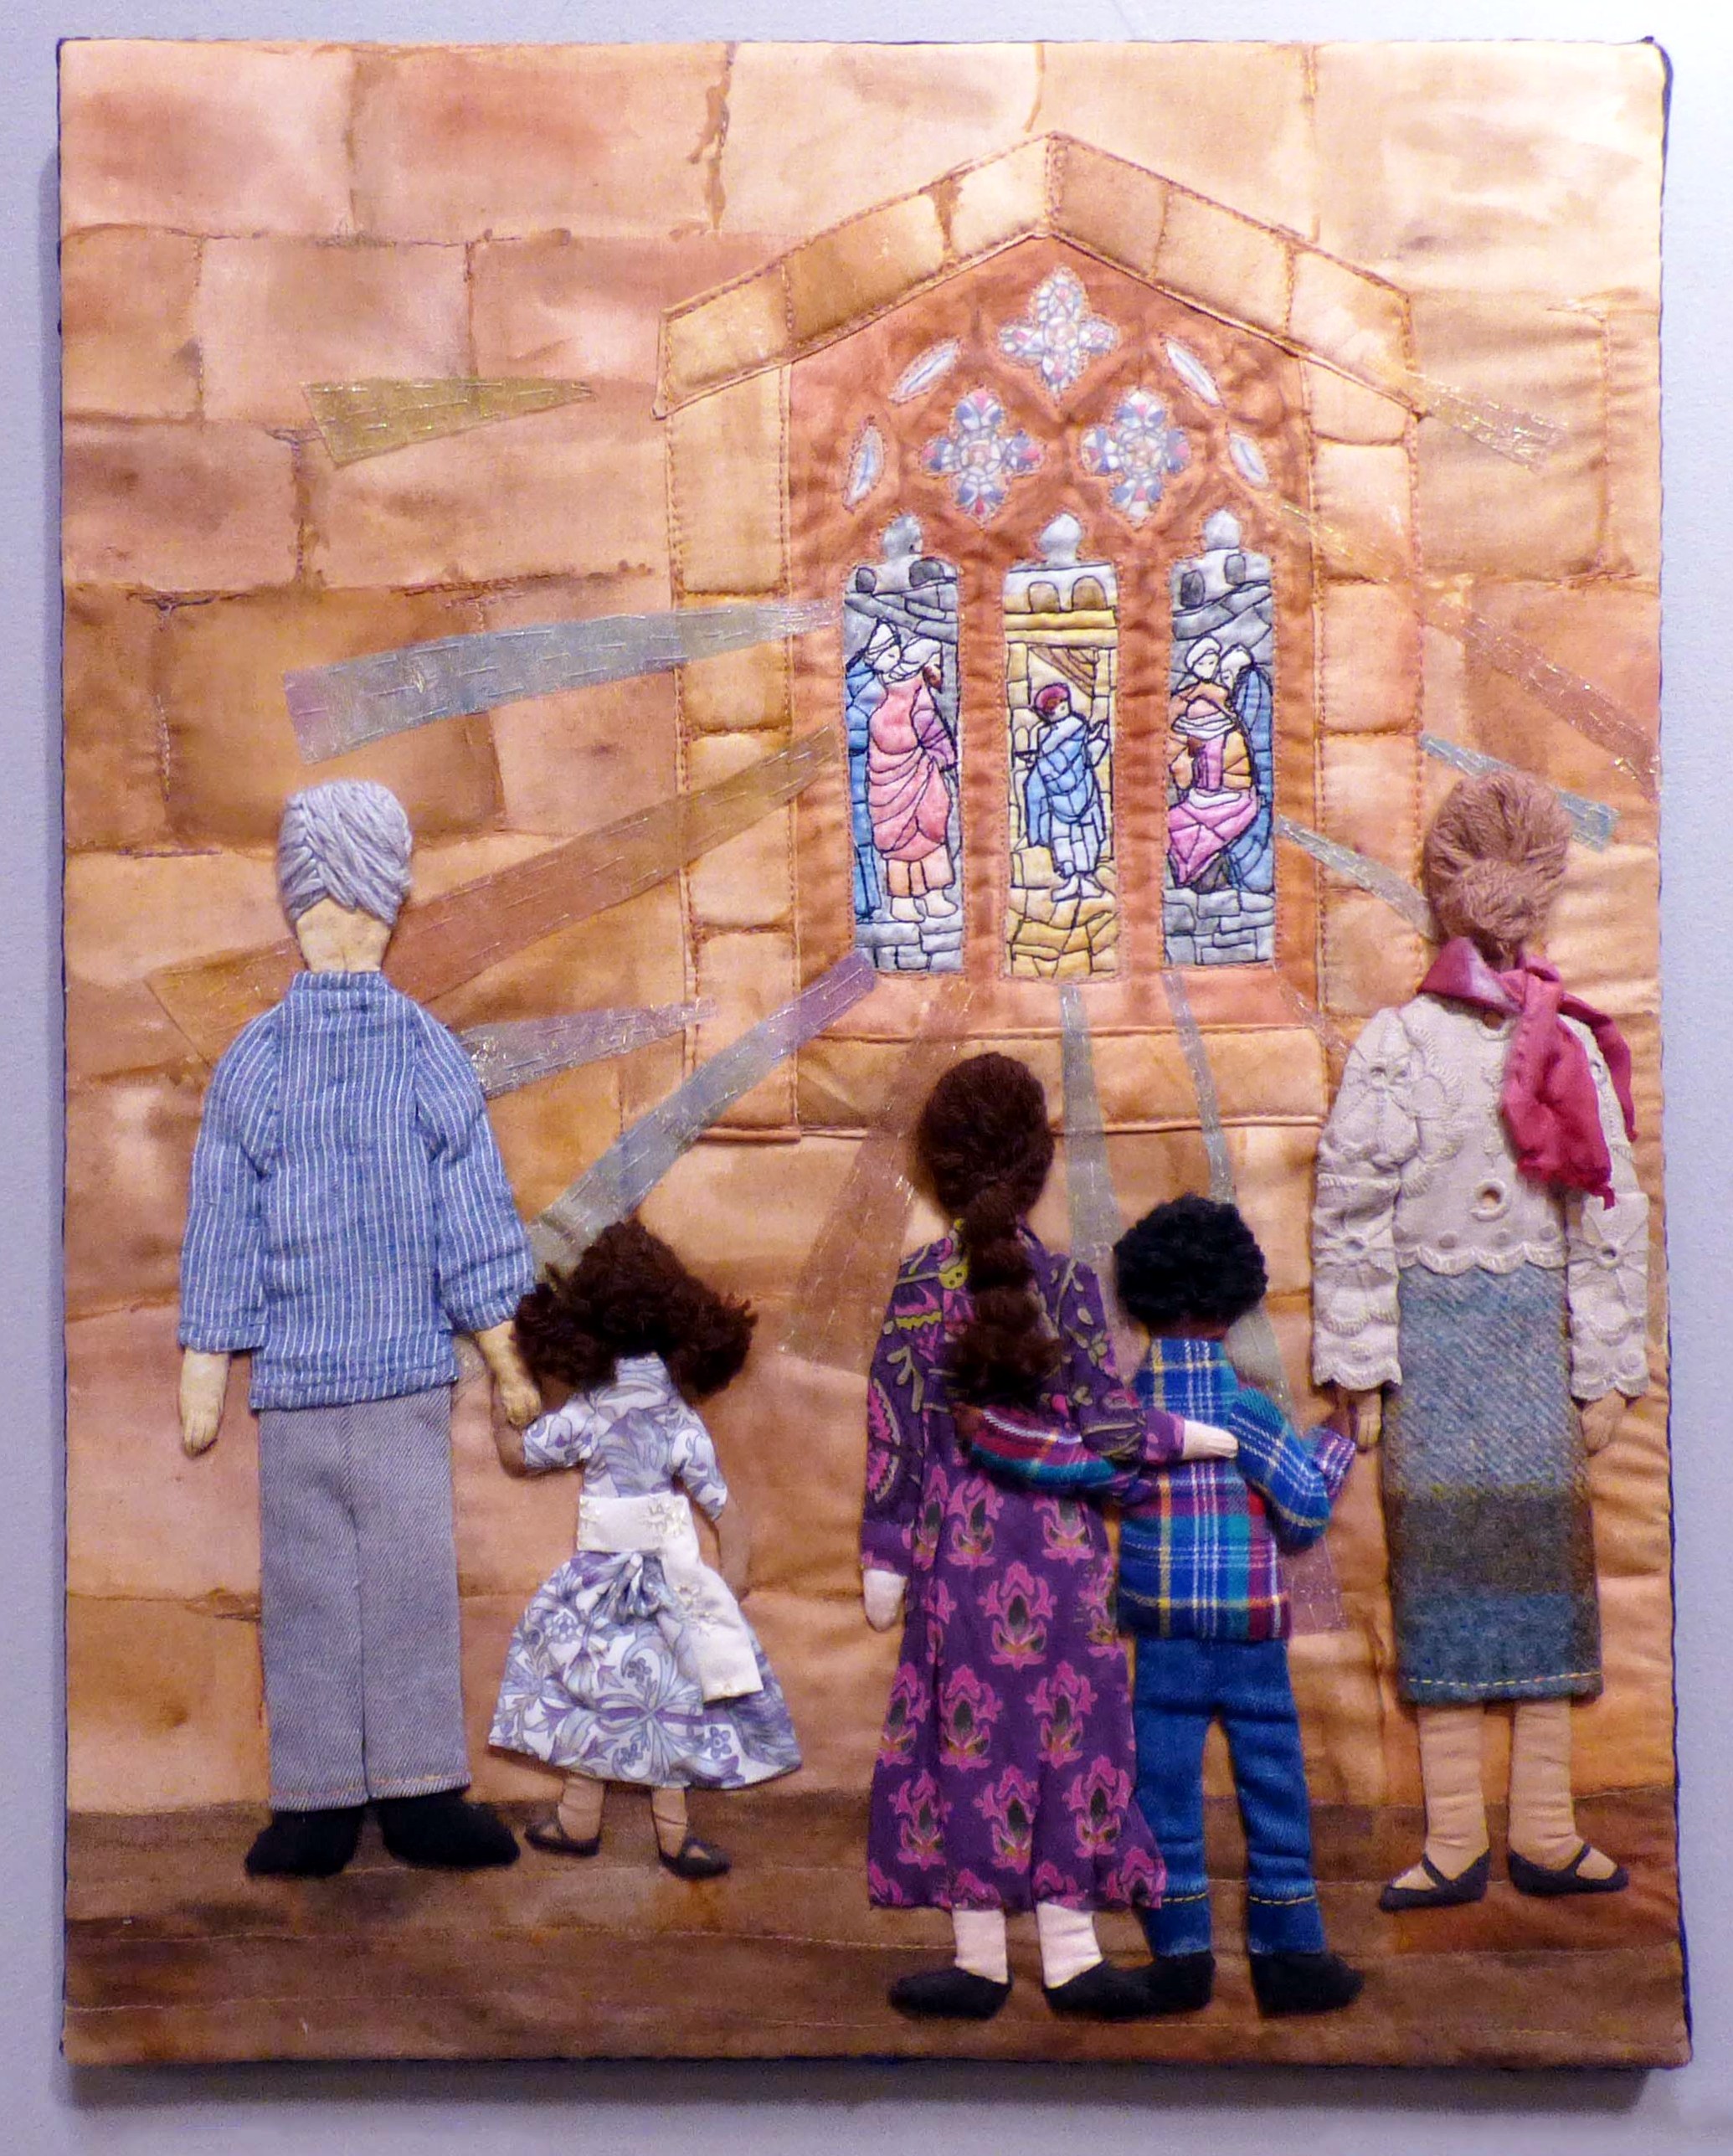 LET THERE BE LIGHT by Mal Ralston, paint, machine and hand stitching, applied fabric figures, Exhibition in All Hallows Church, September 2022